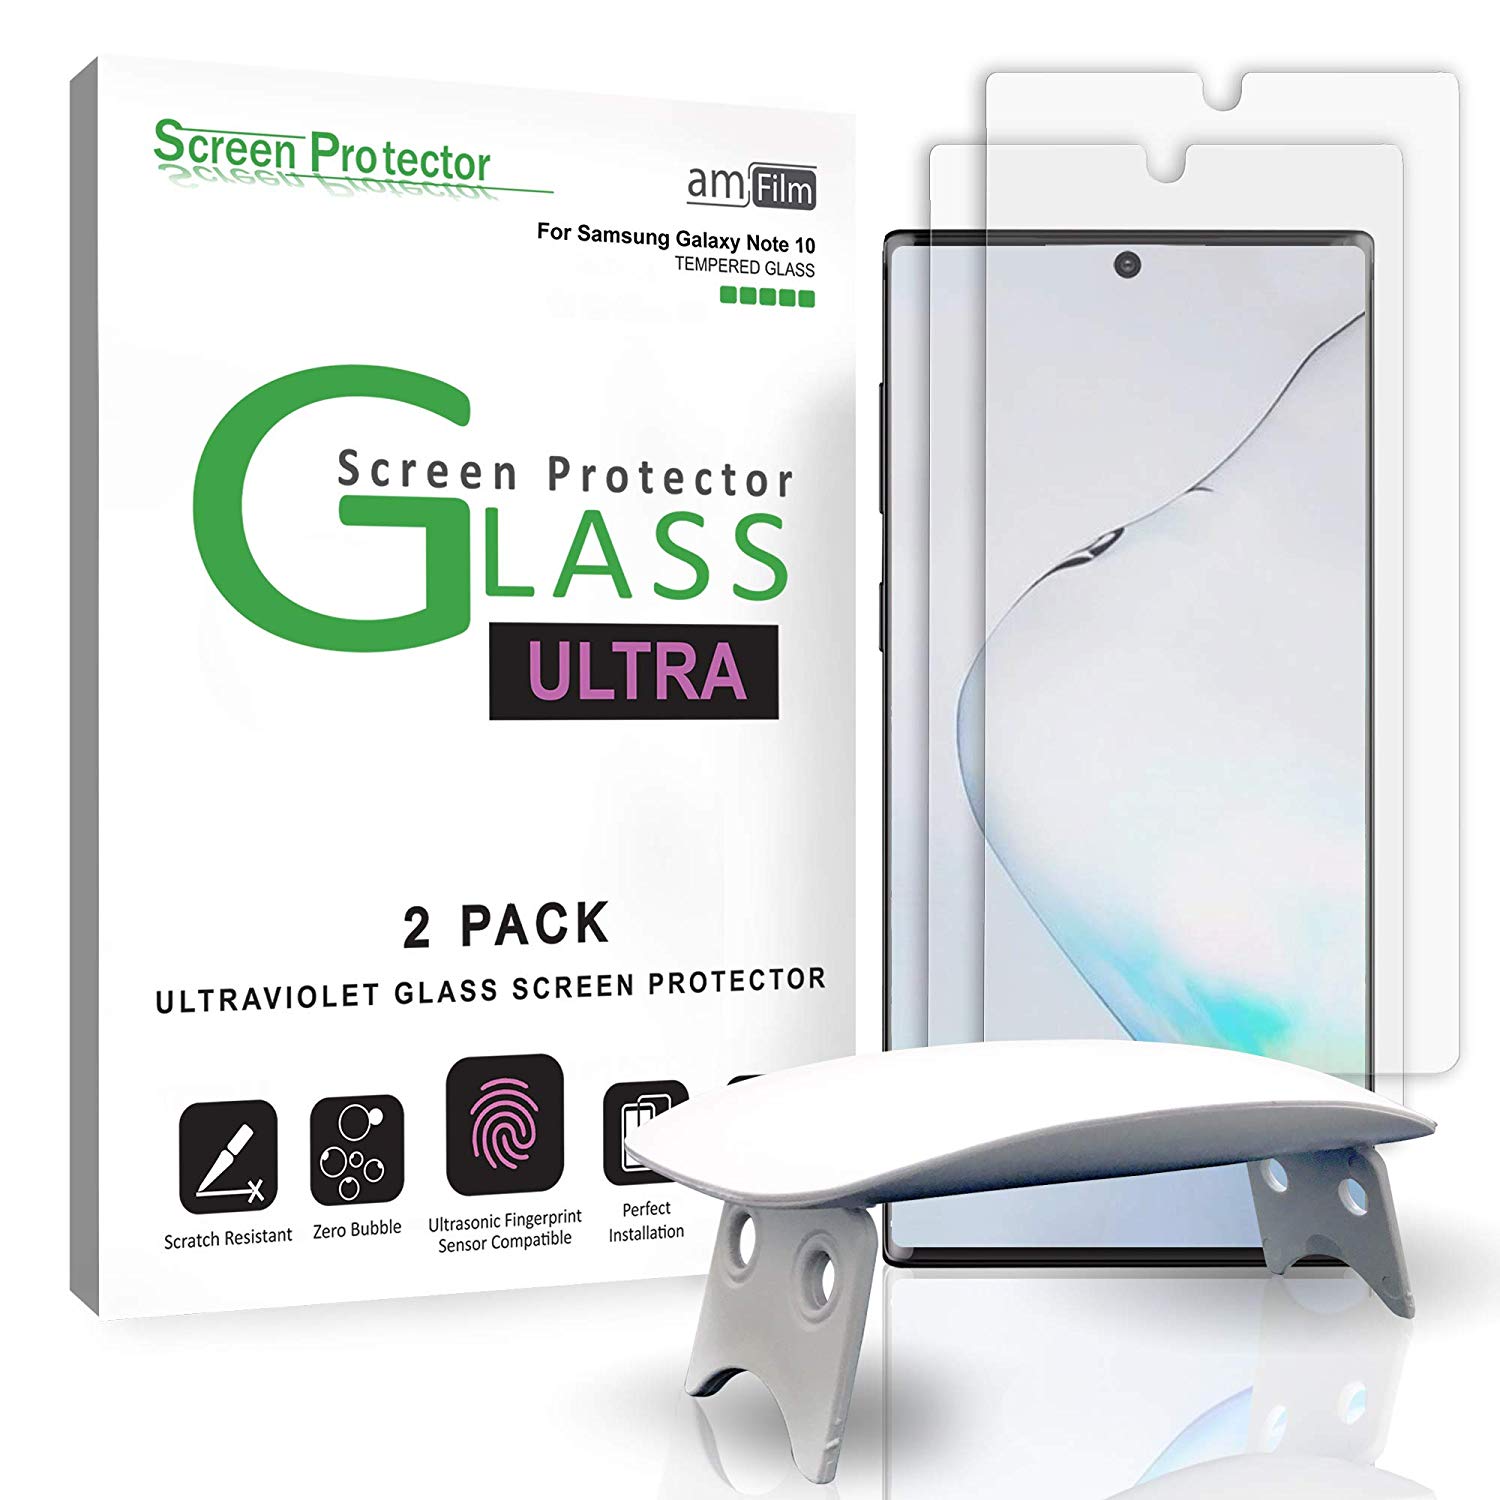 3D Curved Surface HD TransparentTempered Glass 2+2Pack 9H Hardness Fingerprint Unlock Support For Samsung Galaxy Note 10 6.3” Screen Protector Scratch Resistance Galaxy Note 10 Screen Protector 